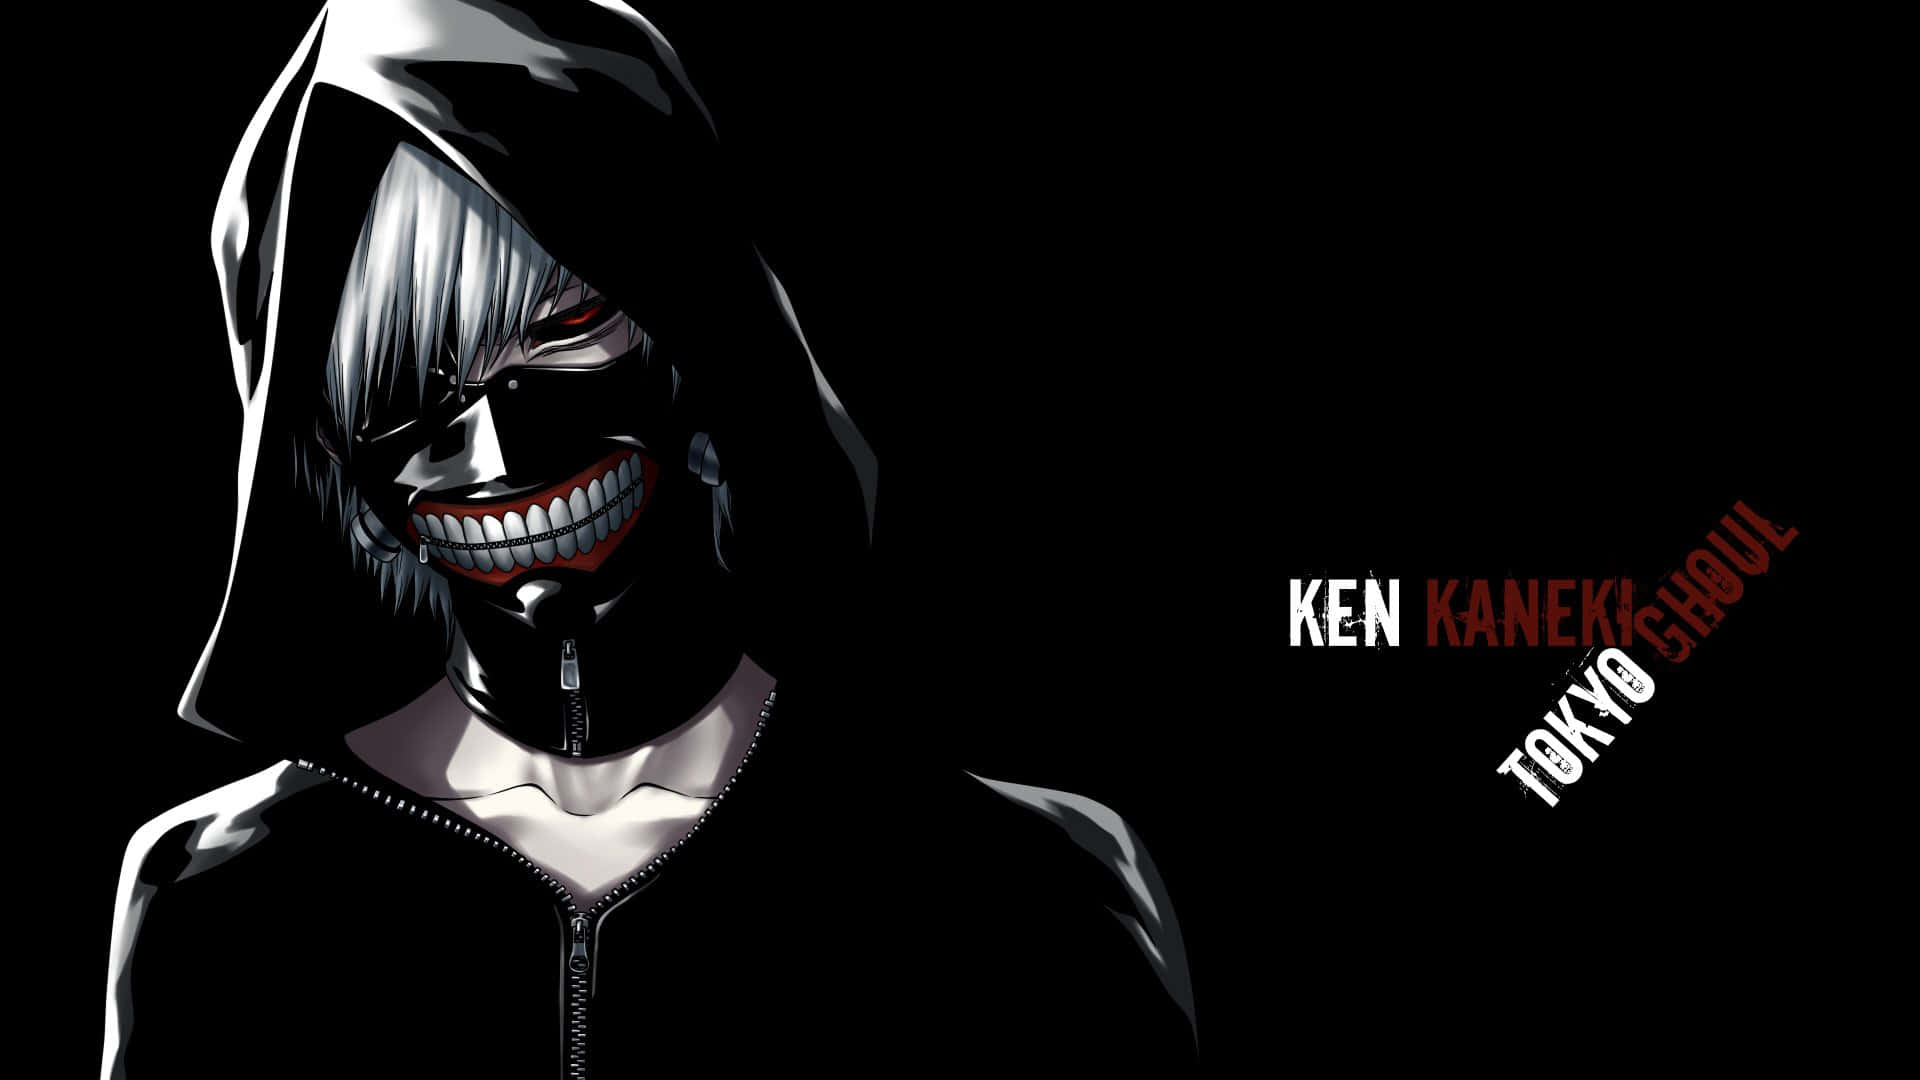 Be one with the darkness - Kaneki's Mask Wallpaper